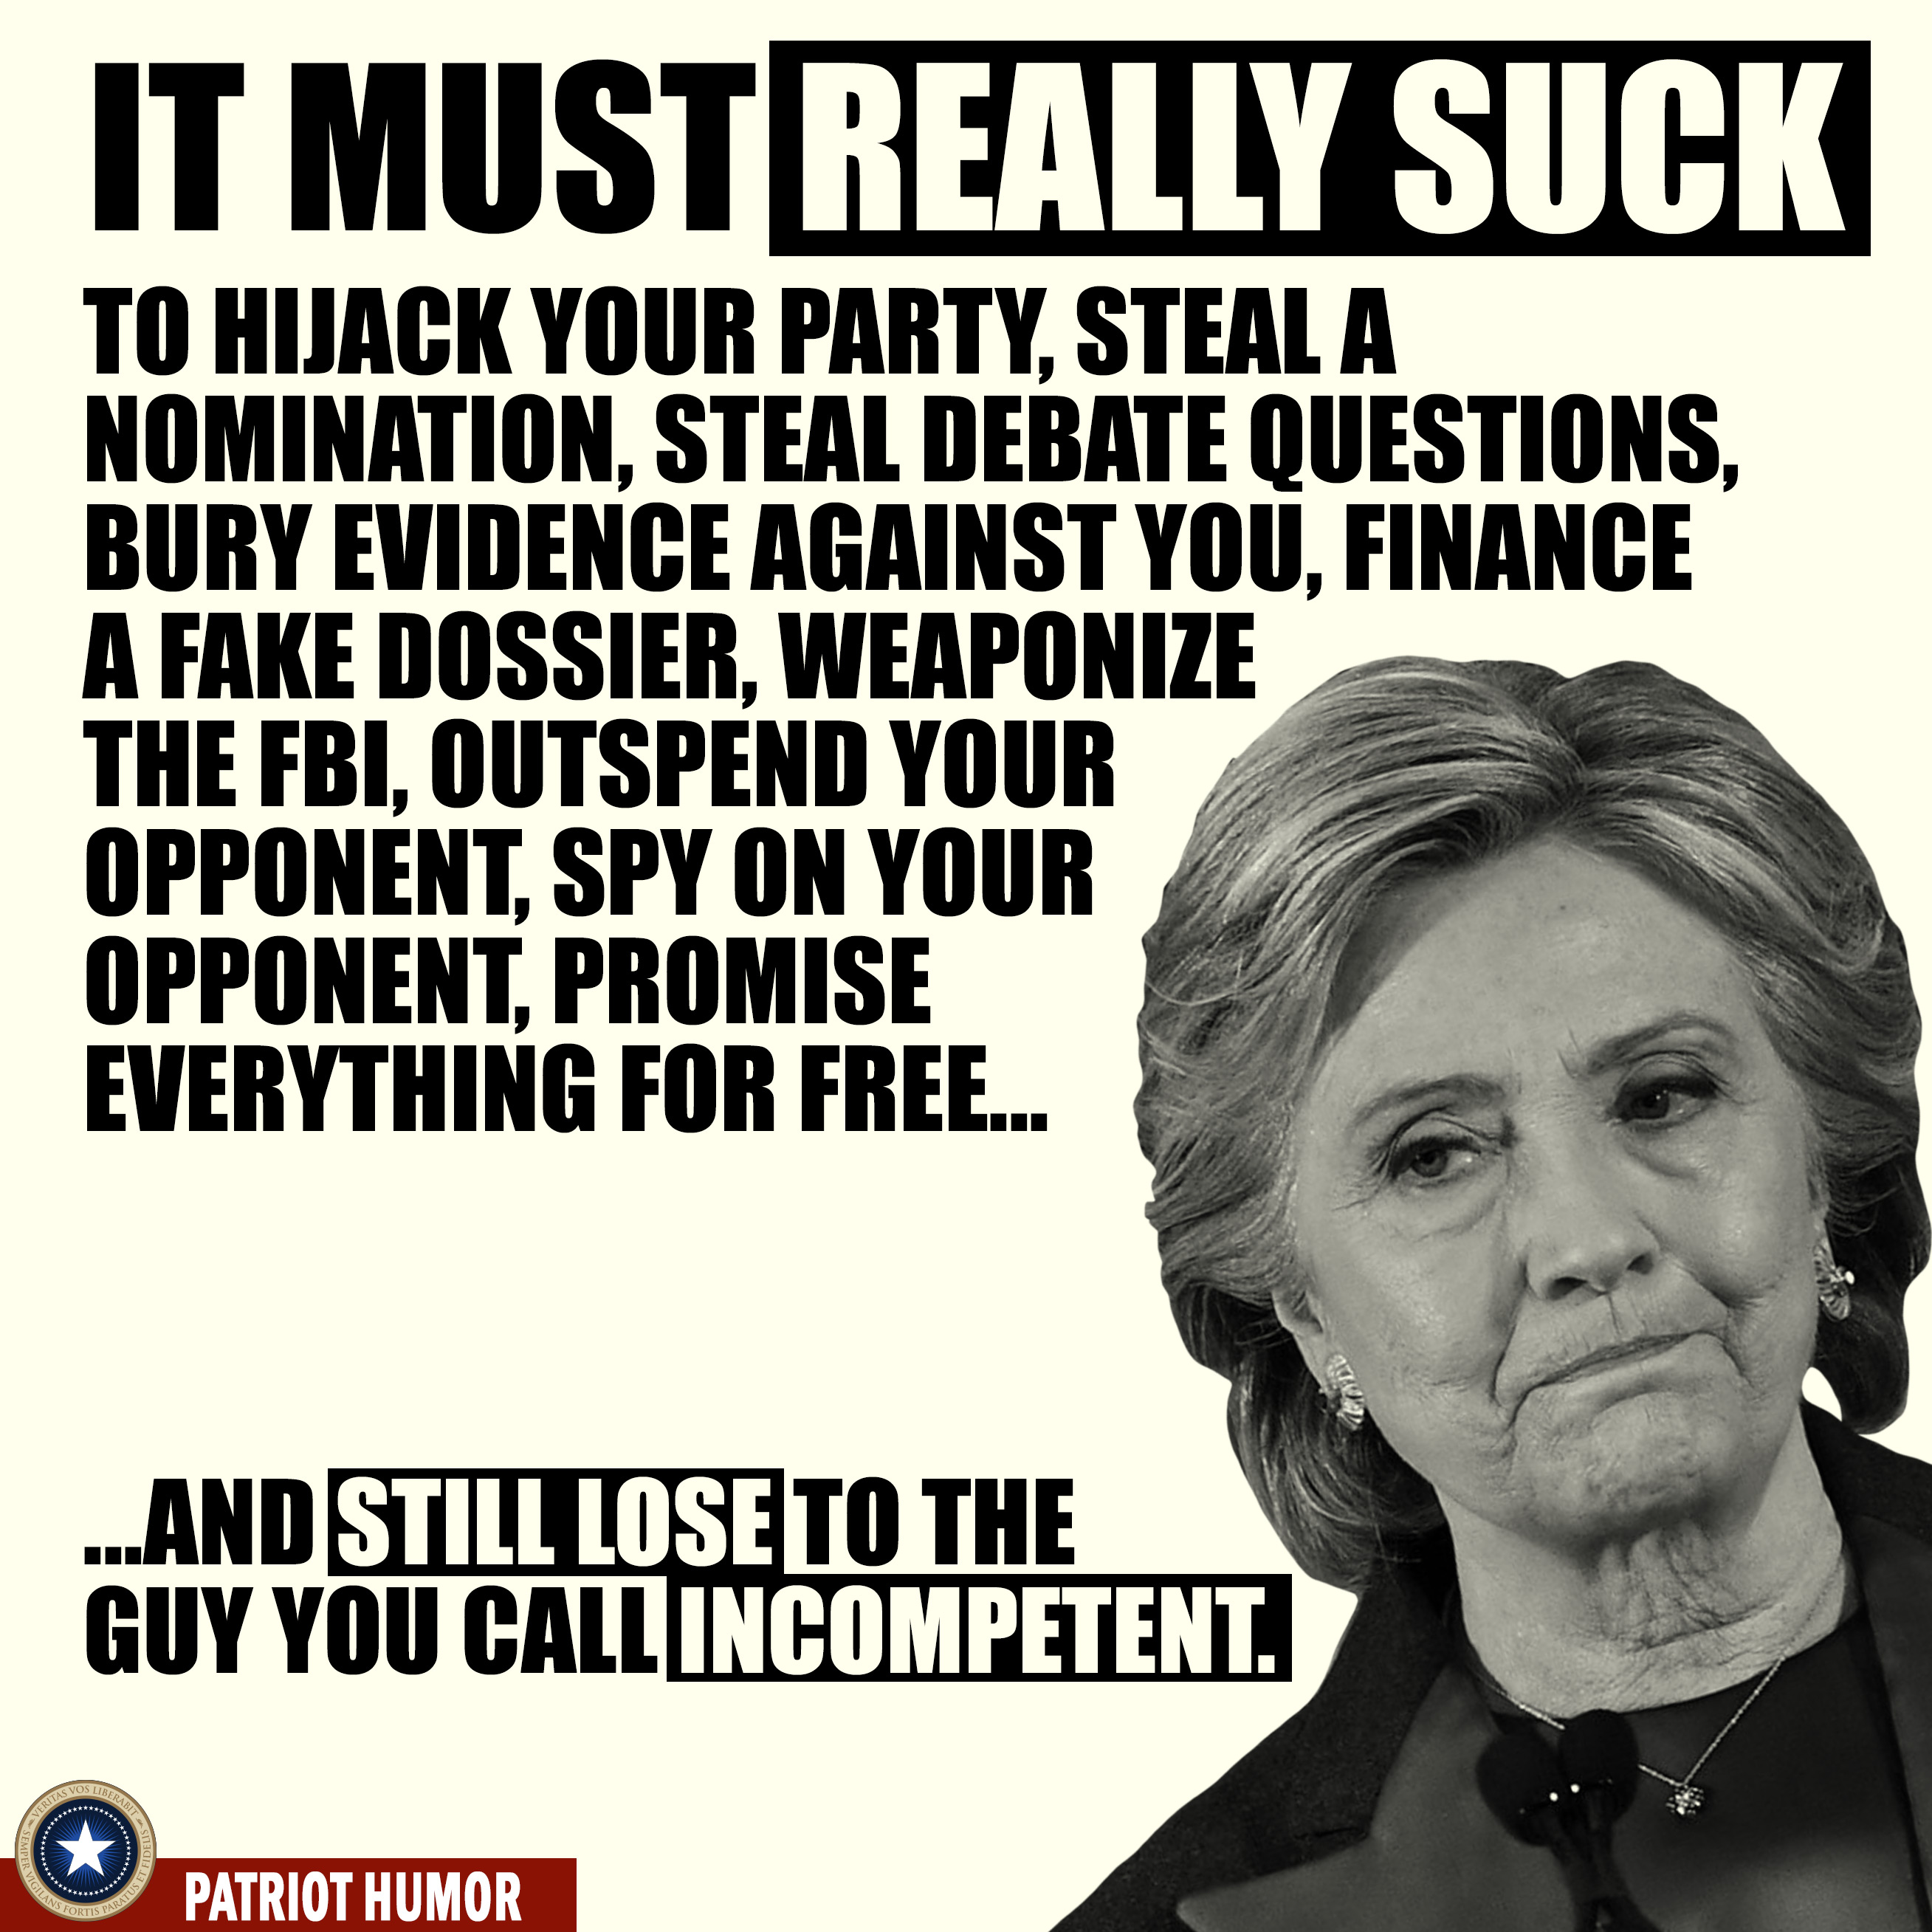 Conservative memes - can do anything - It Must Really Sucki To Hijack Your Party, Steal A Nomination. Steal Debate Questions Bury Evidence Against You, Finance A Fake Dossier Weaponize The Fbi, Outspend Your Opponent. Spy On Your Opponent, Promise Everyth